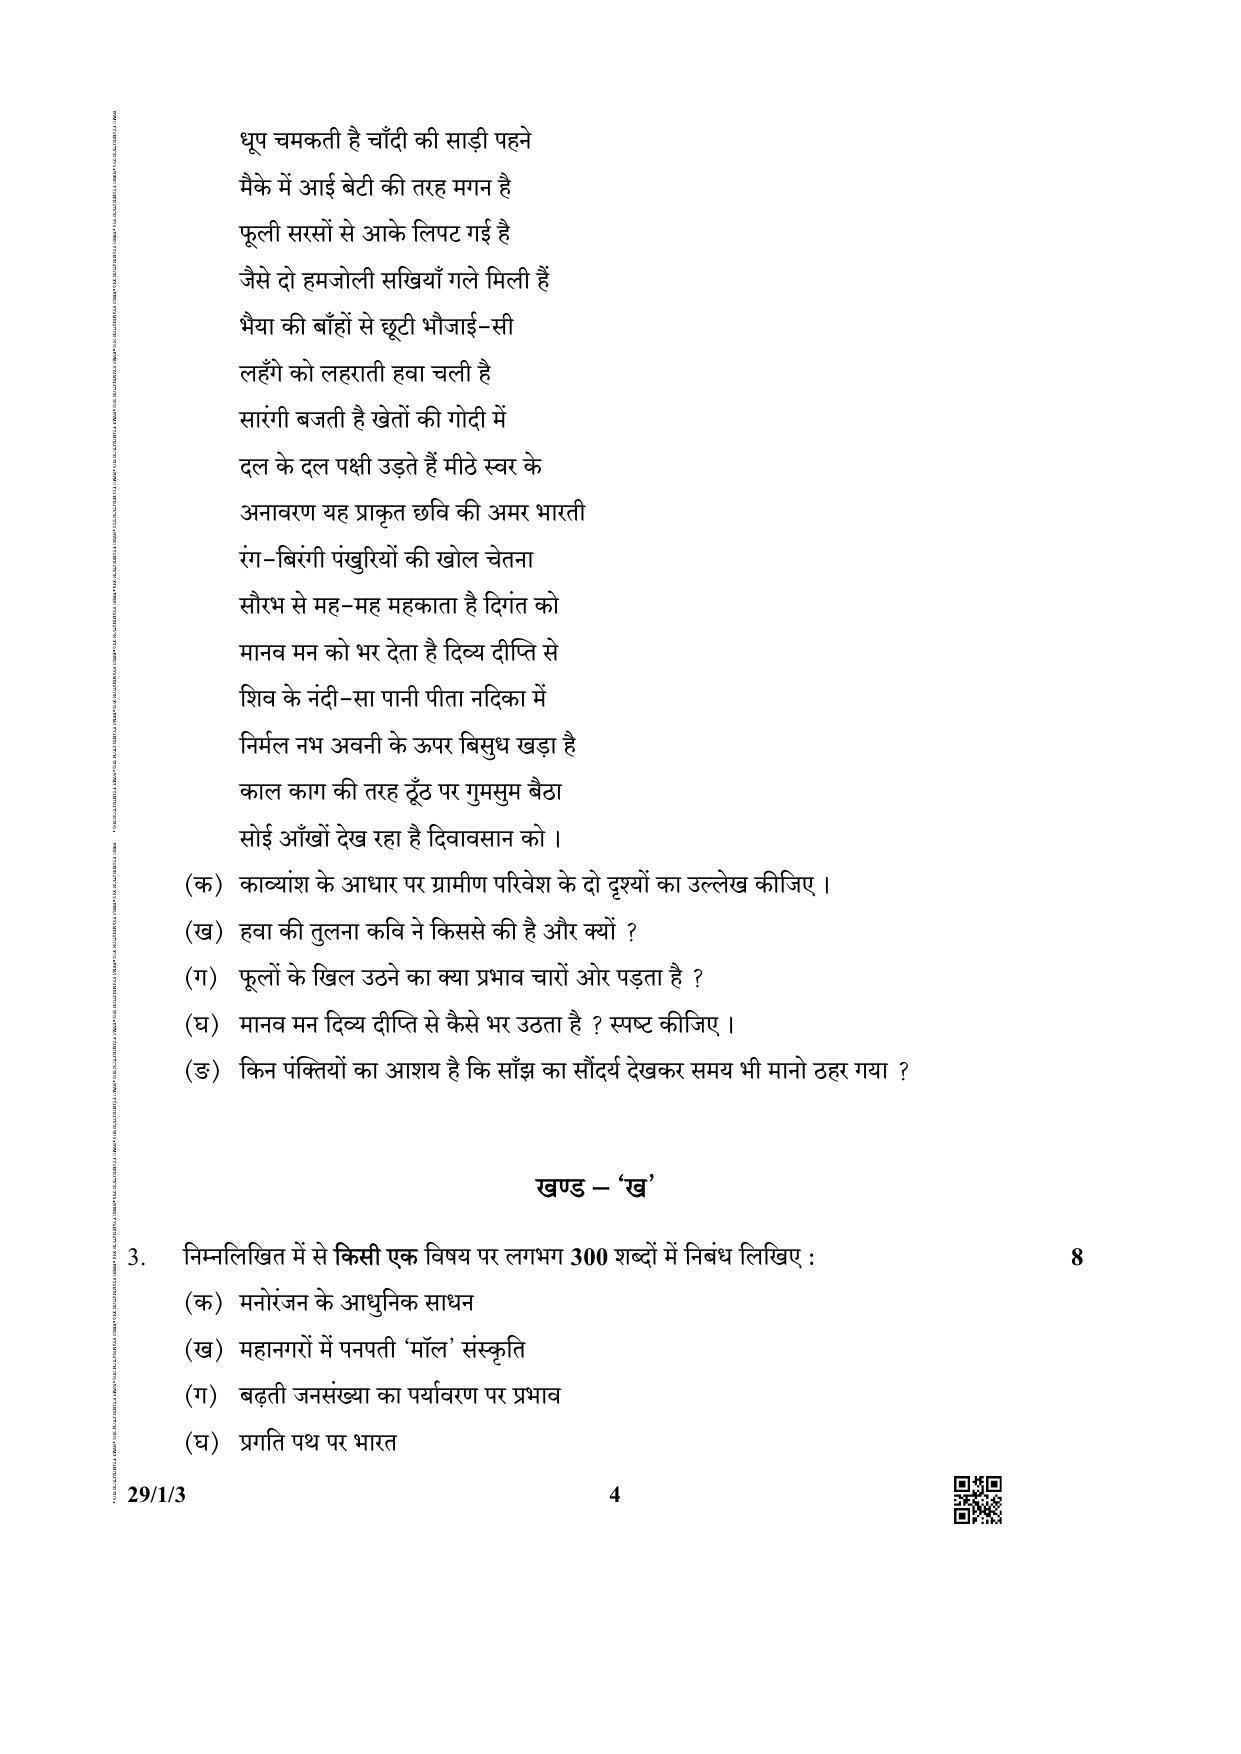 CBSE Class 12 29-1-3 (Hindi ELECTIVE) 2019 Question Paper - Page 4